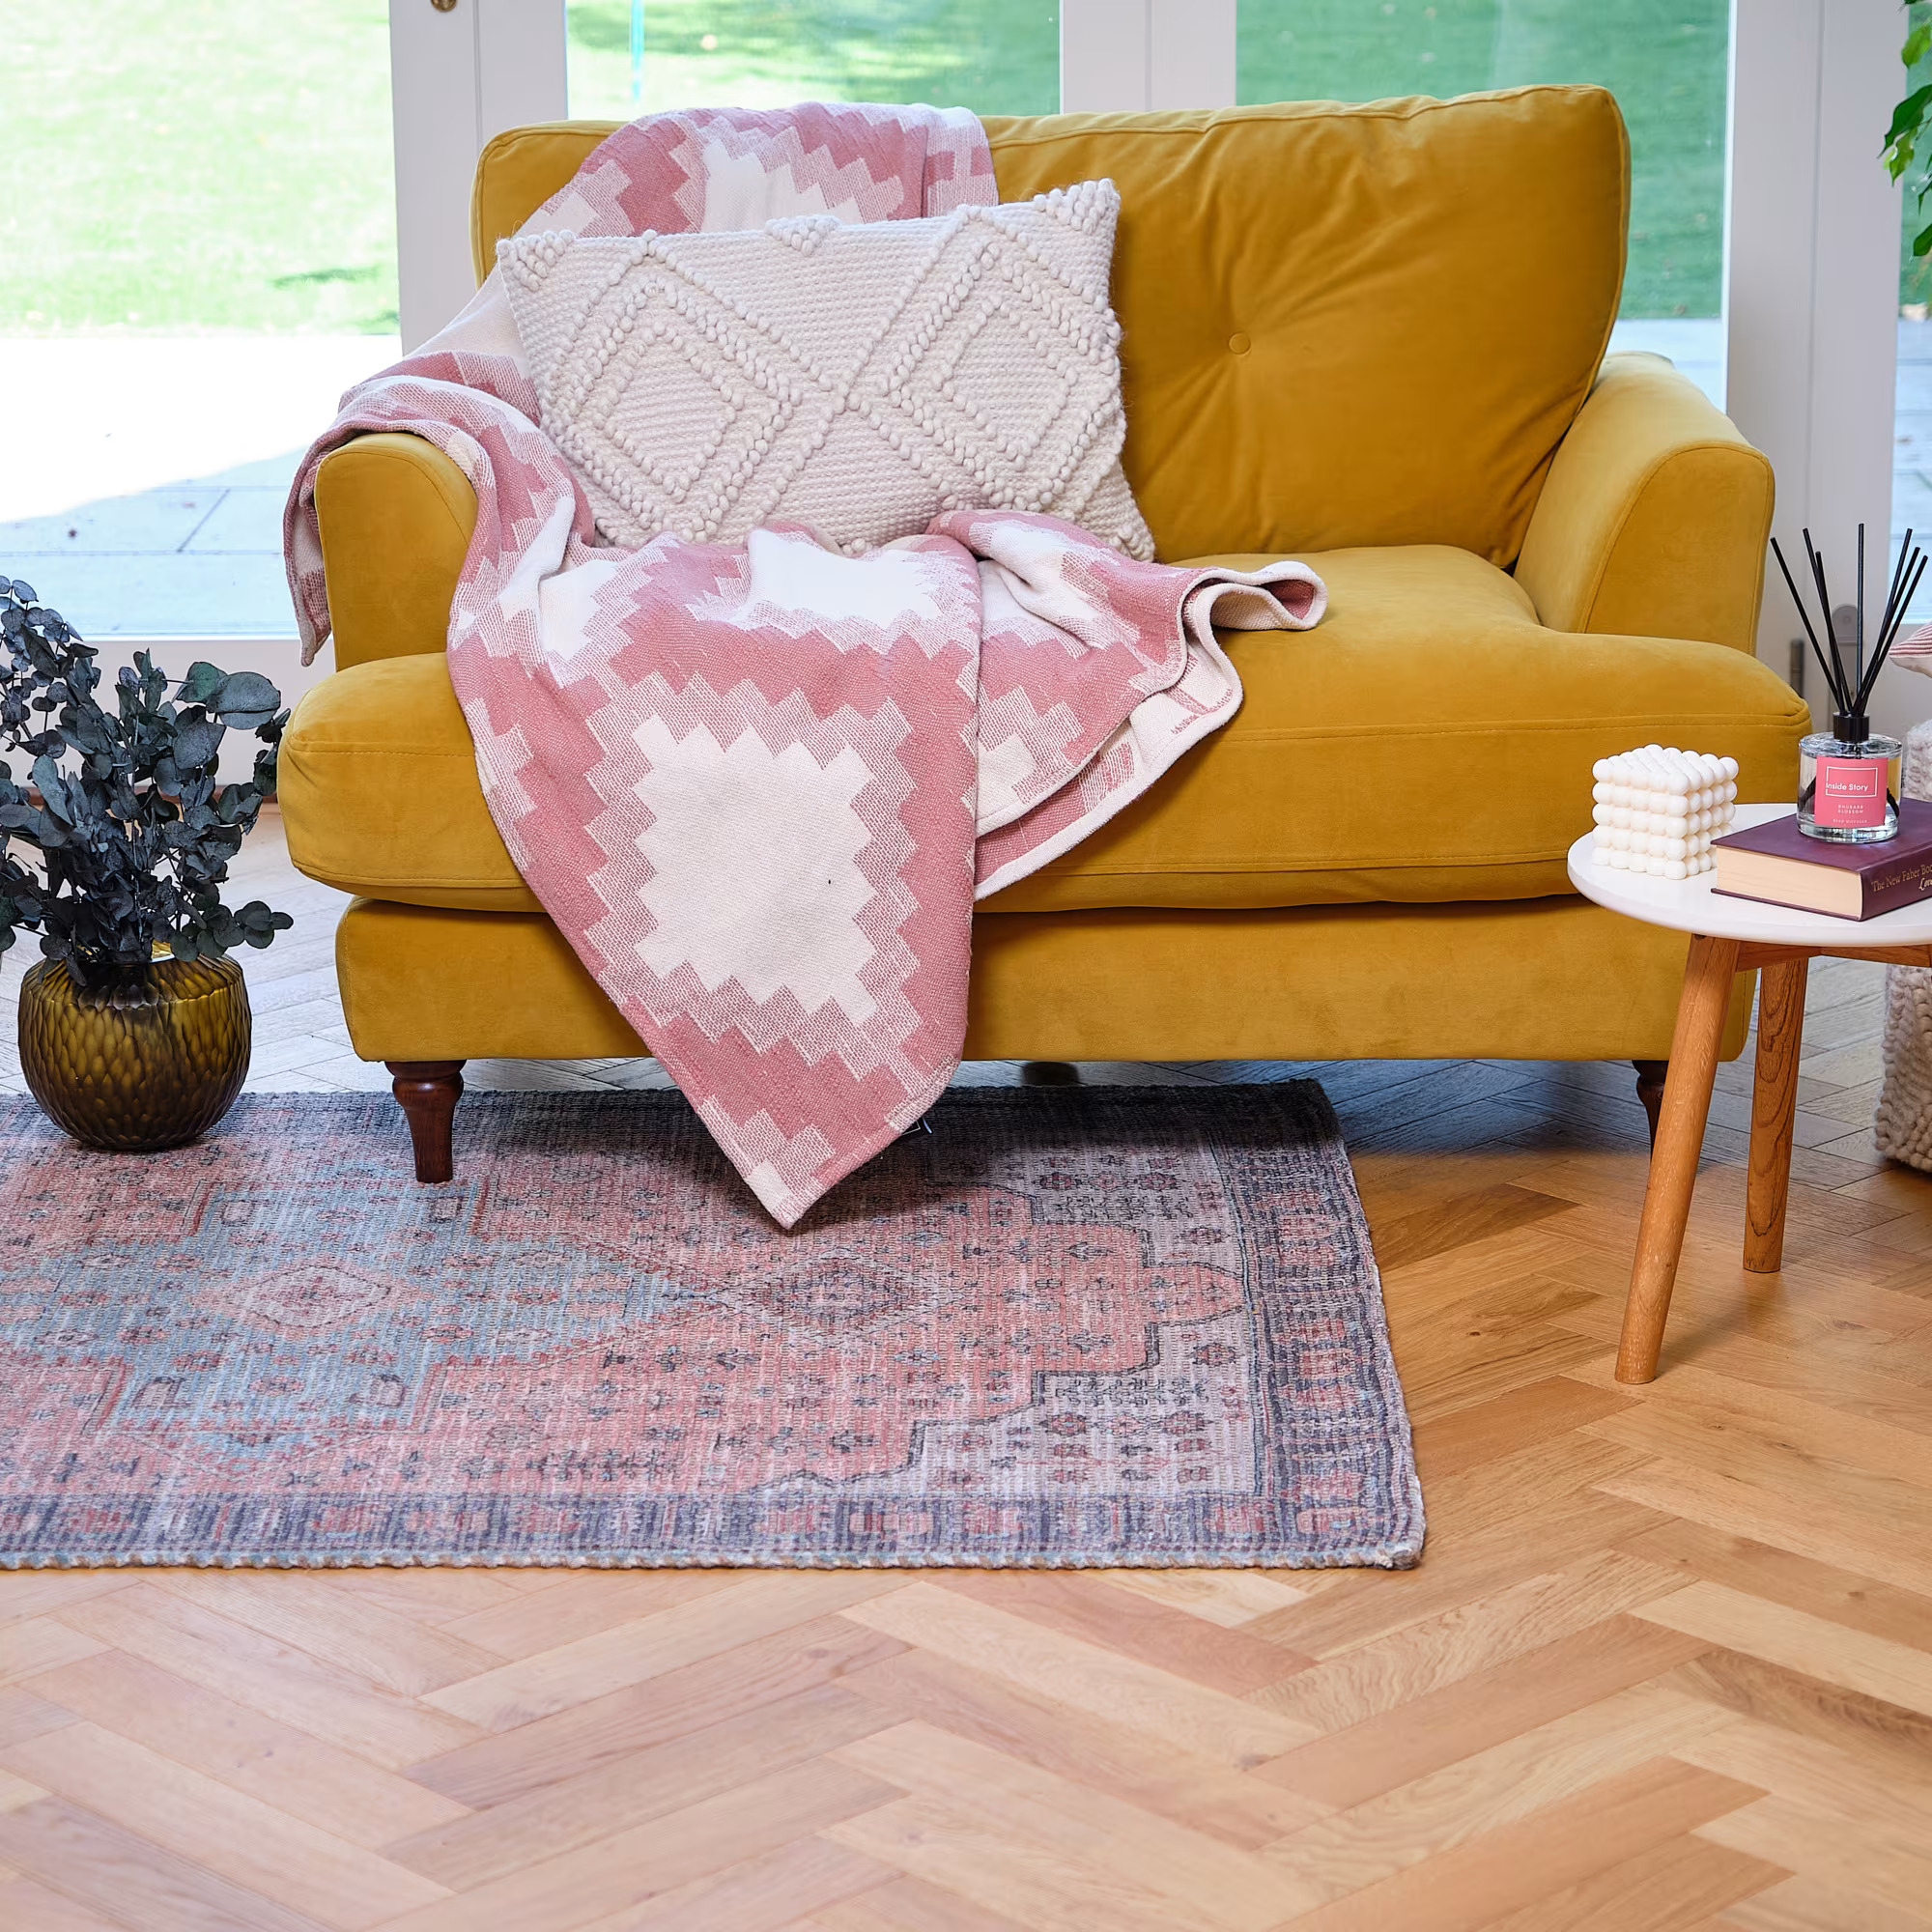 A bright living space with a chair and complementary rug